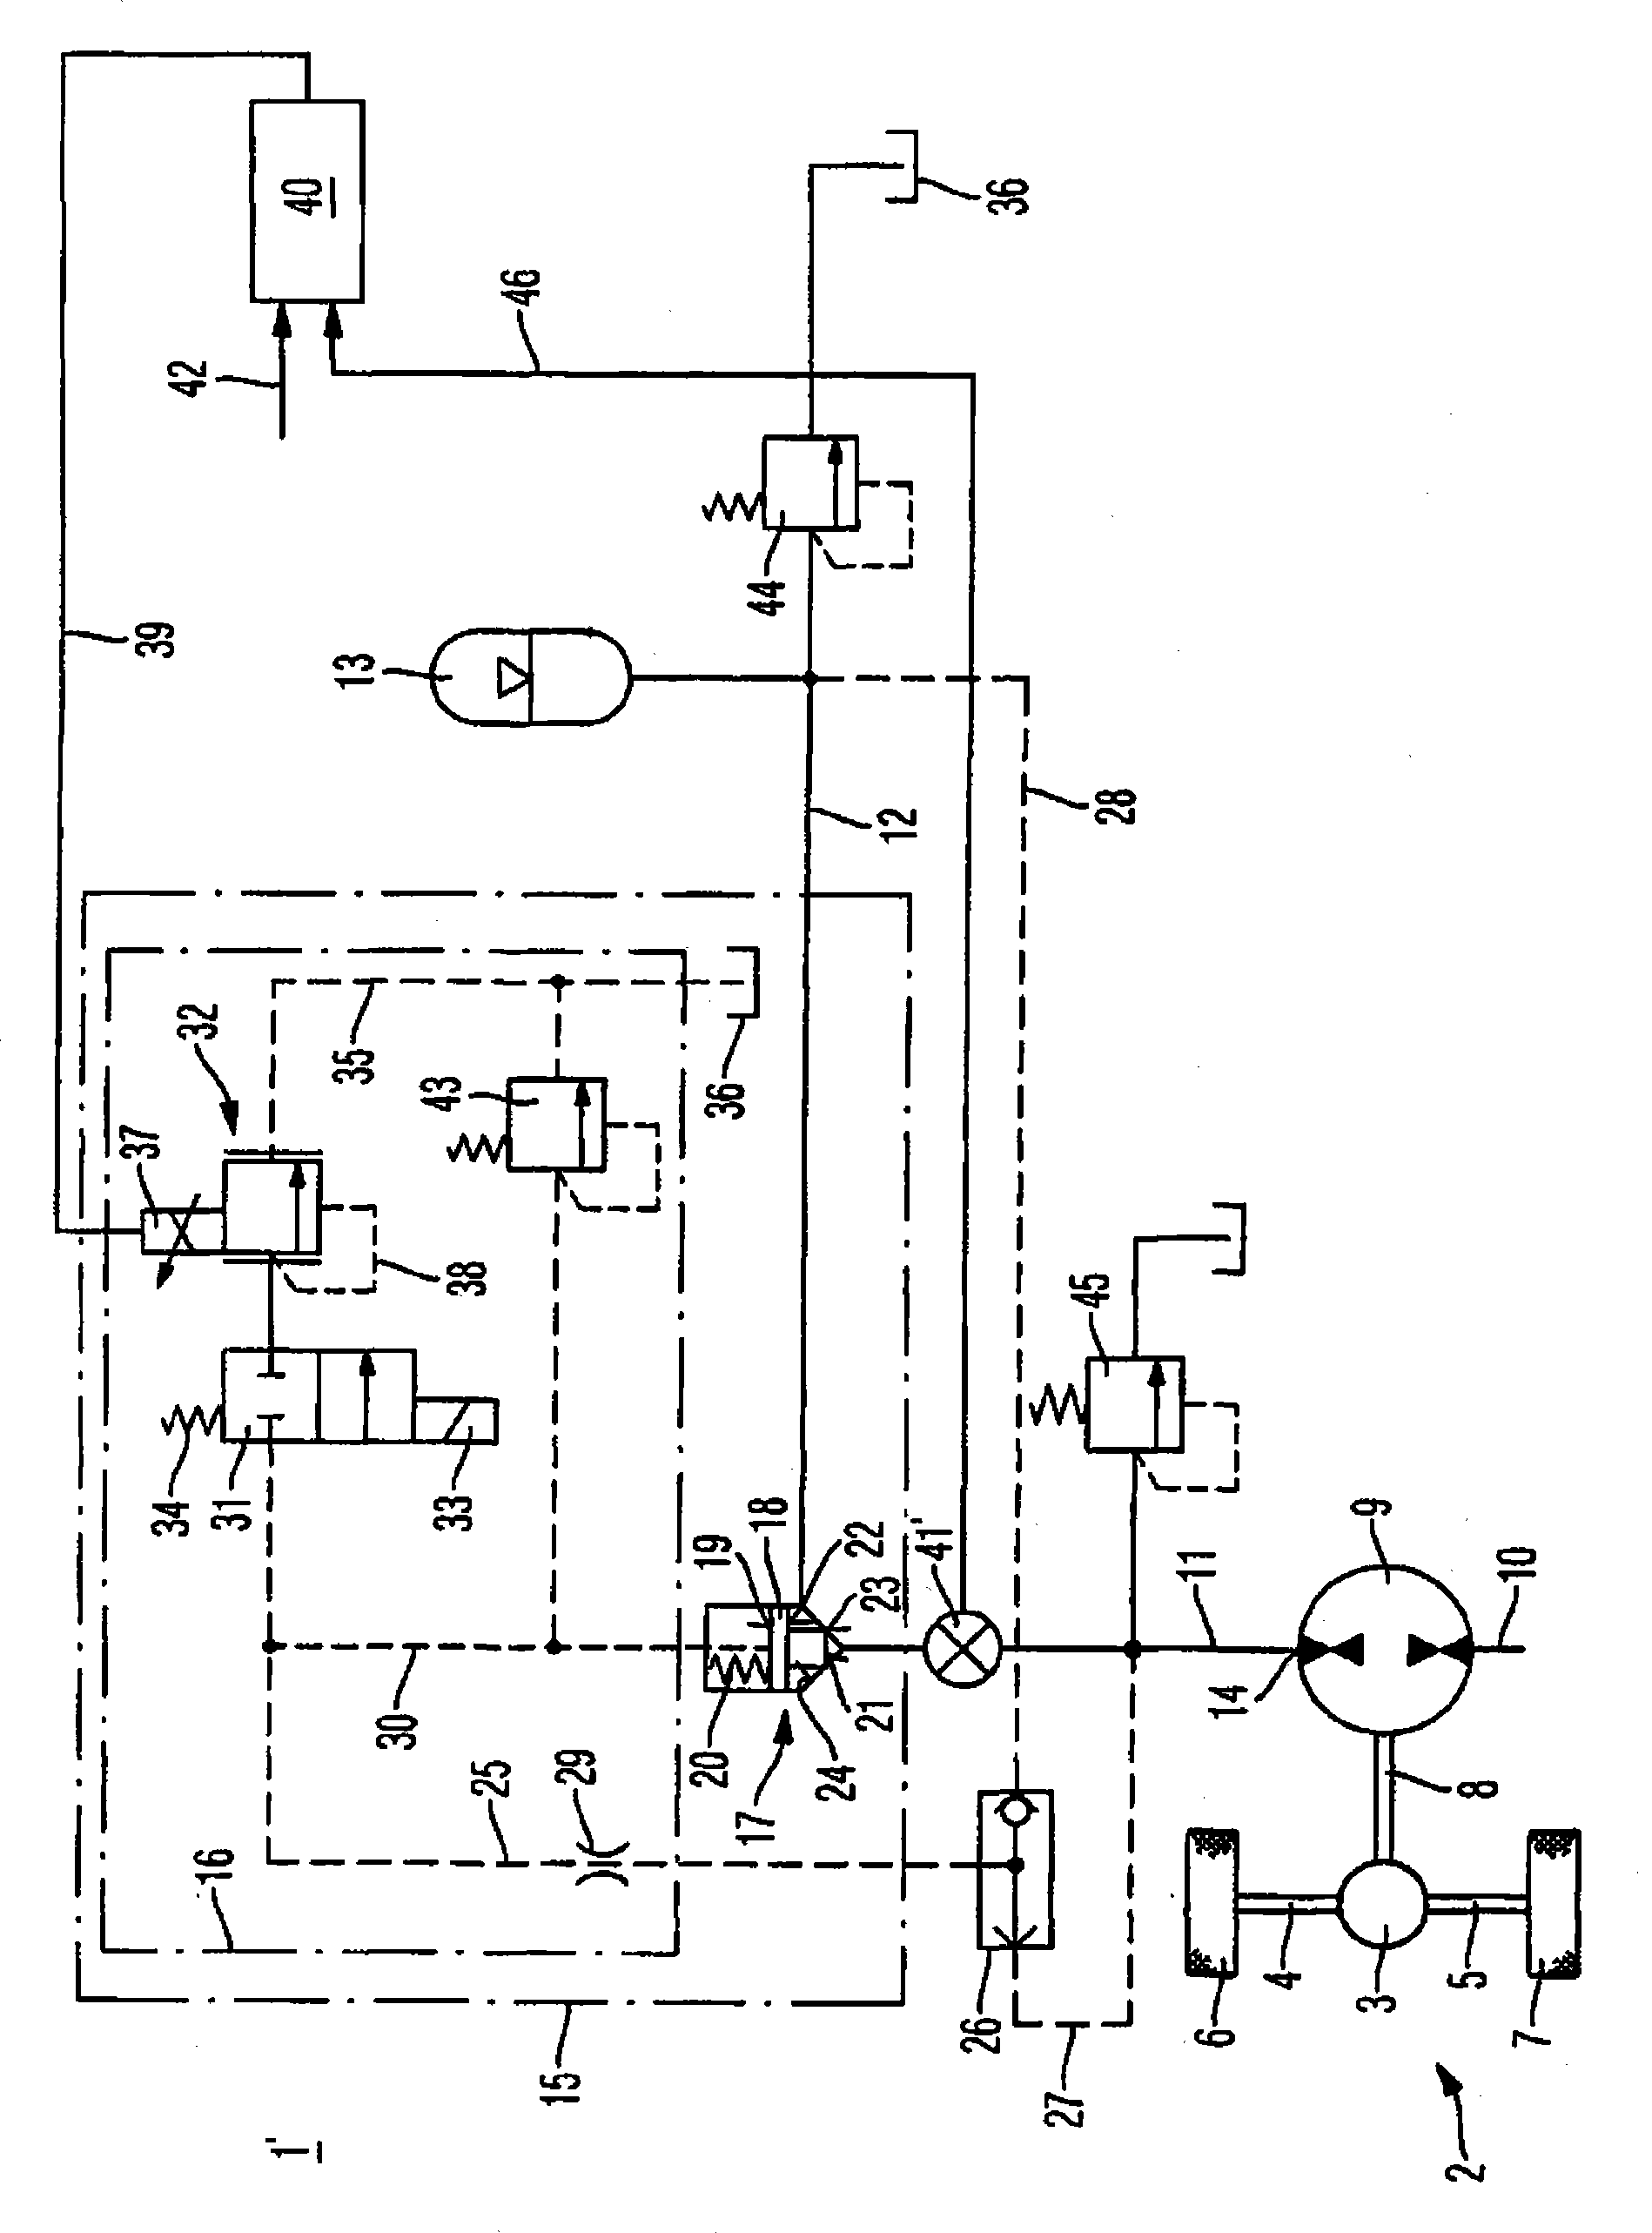 Drive with an energy recovery function having a brake pressure control valve